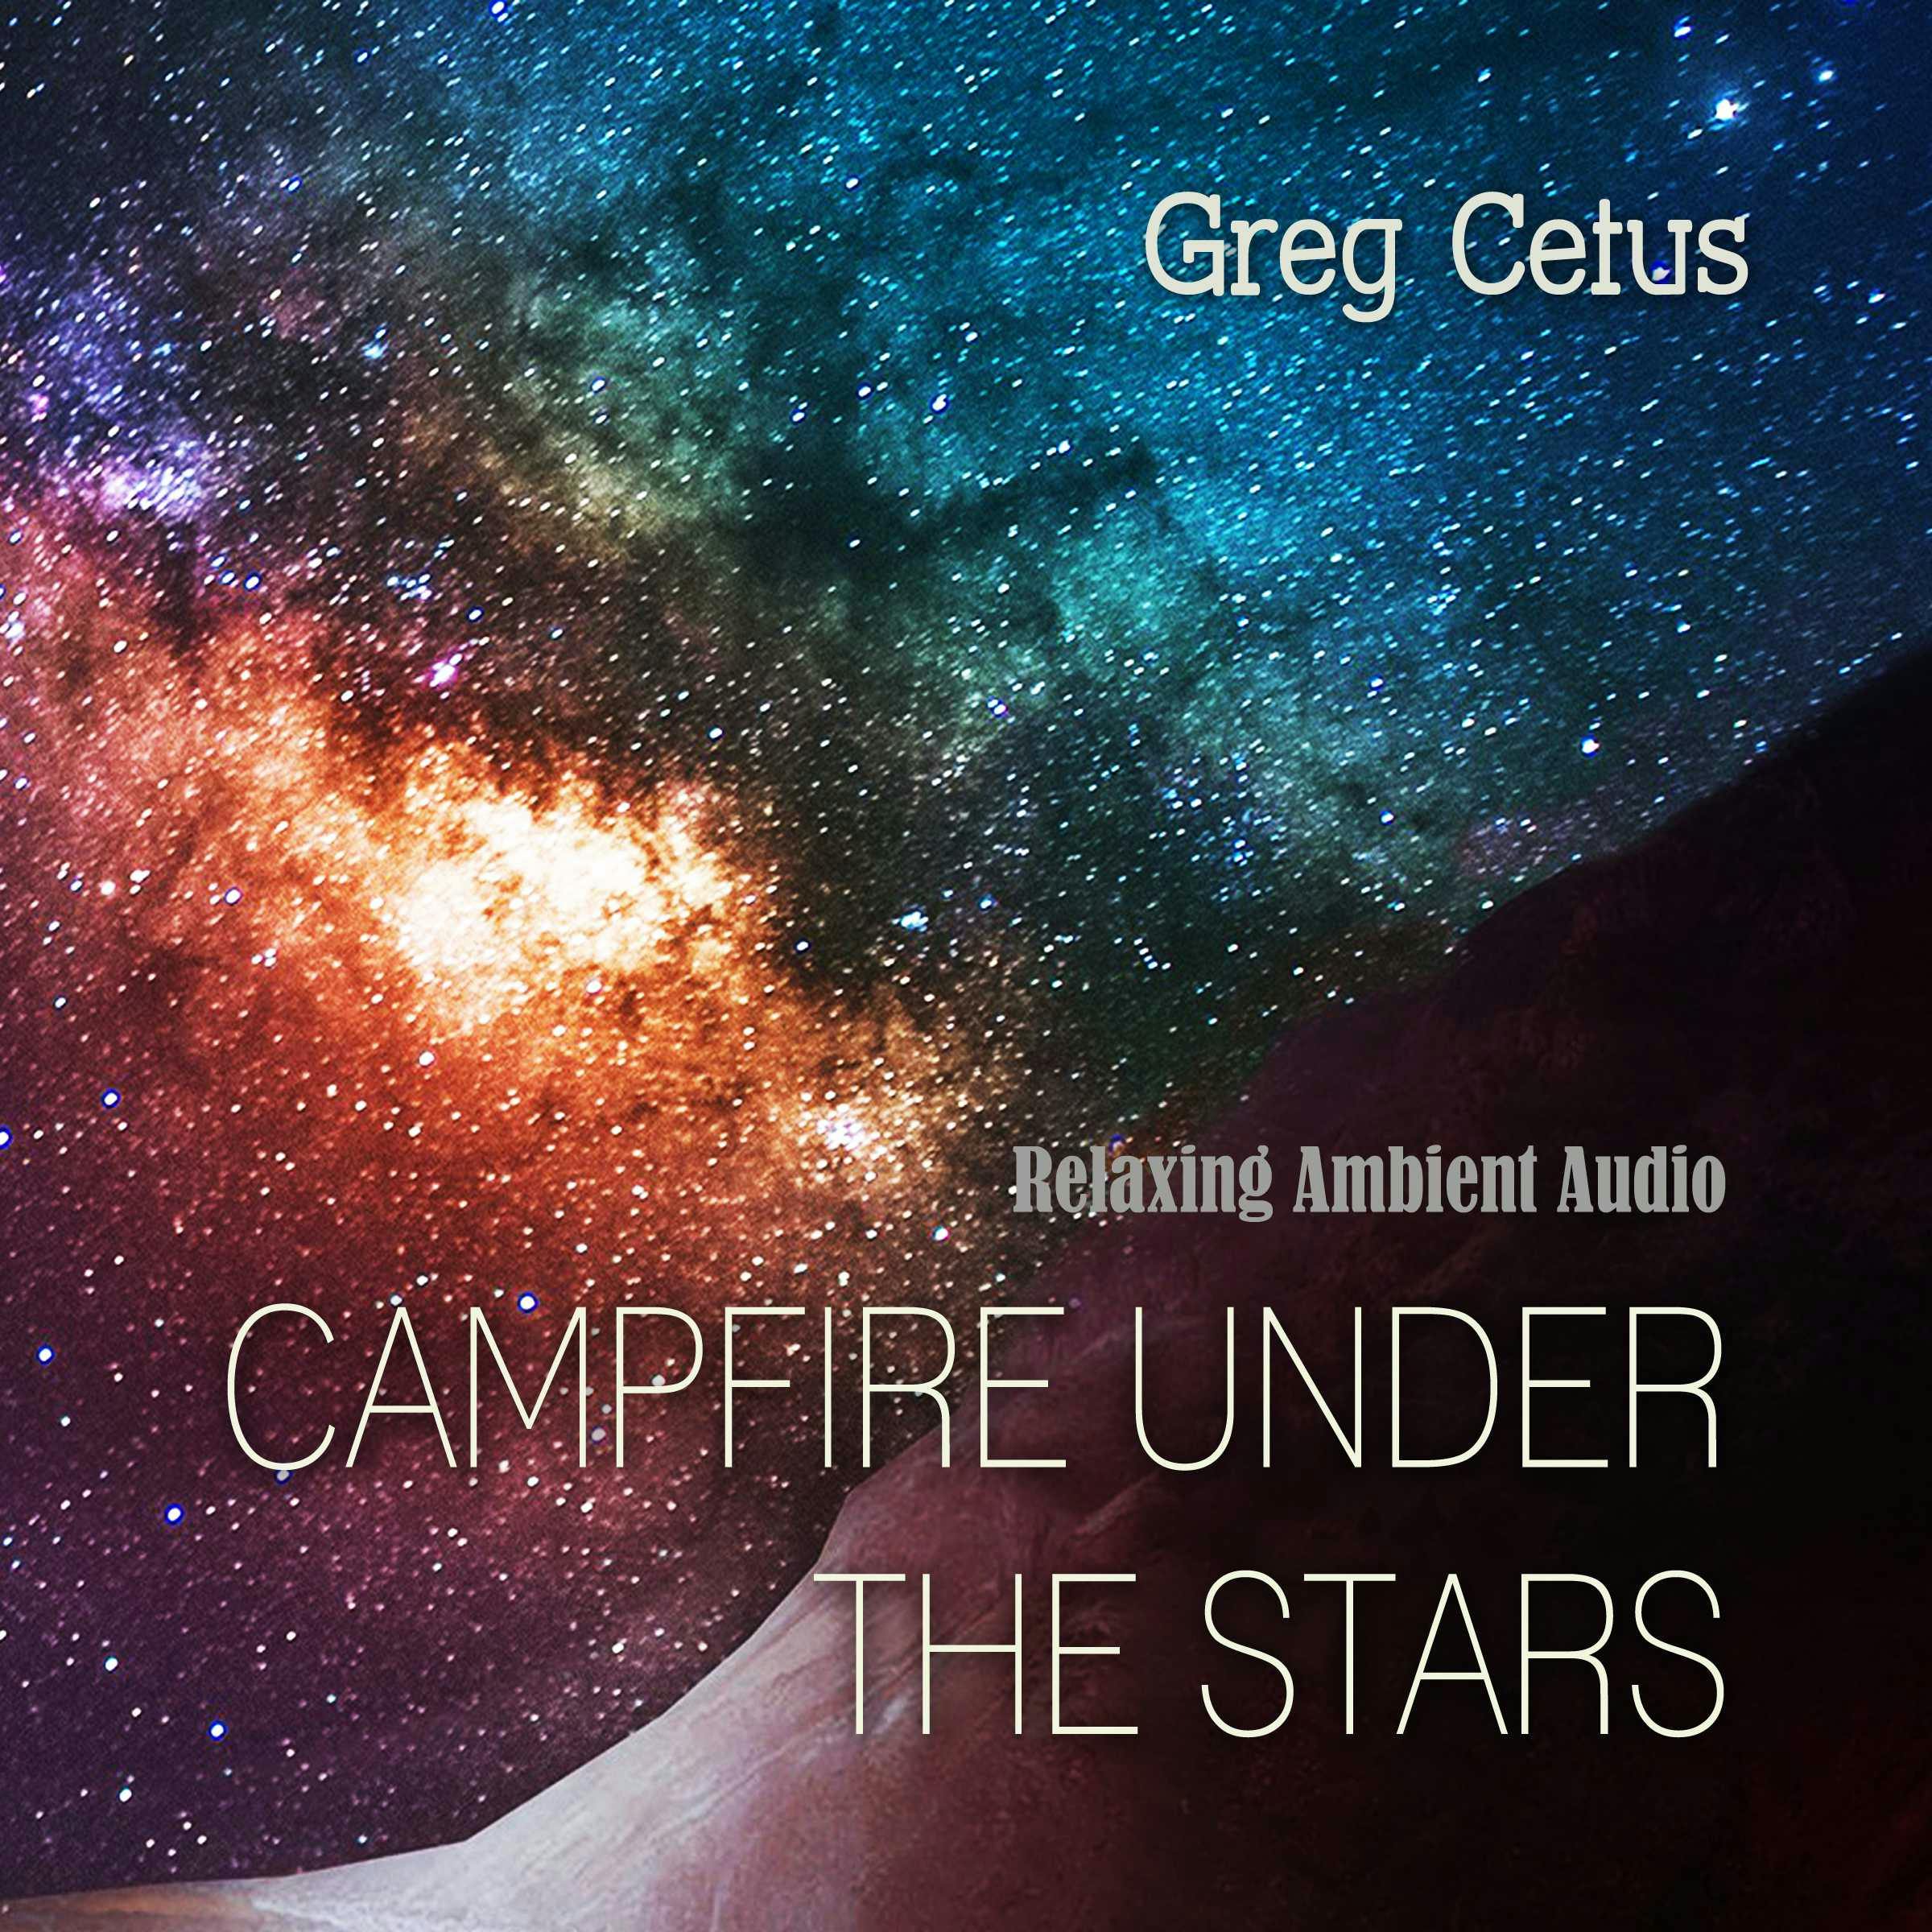 Campfire Under The Stars: Relaxing Ambient Audio - Greg Cetus